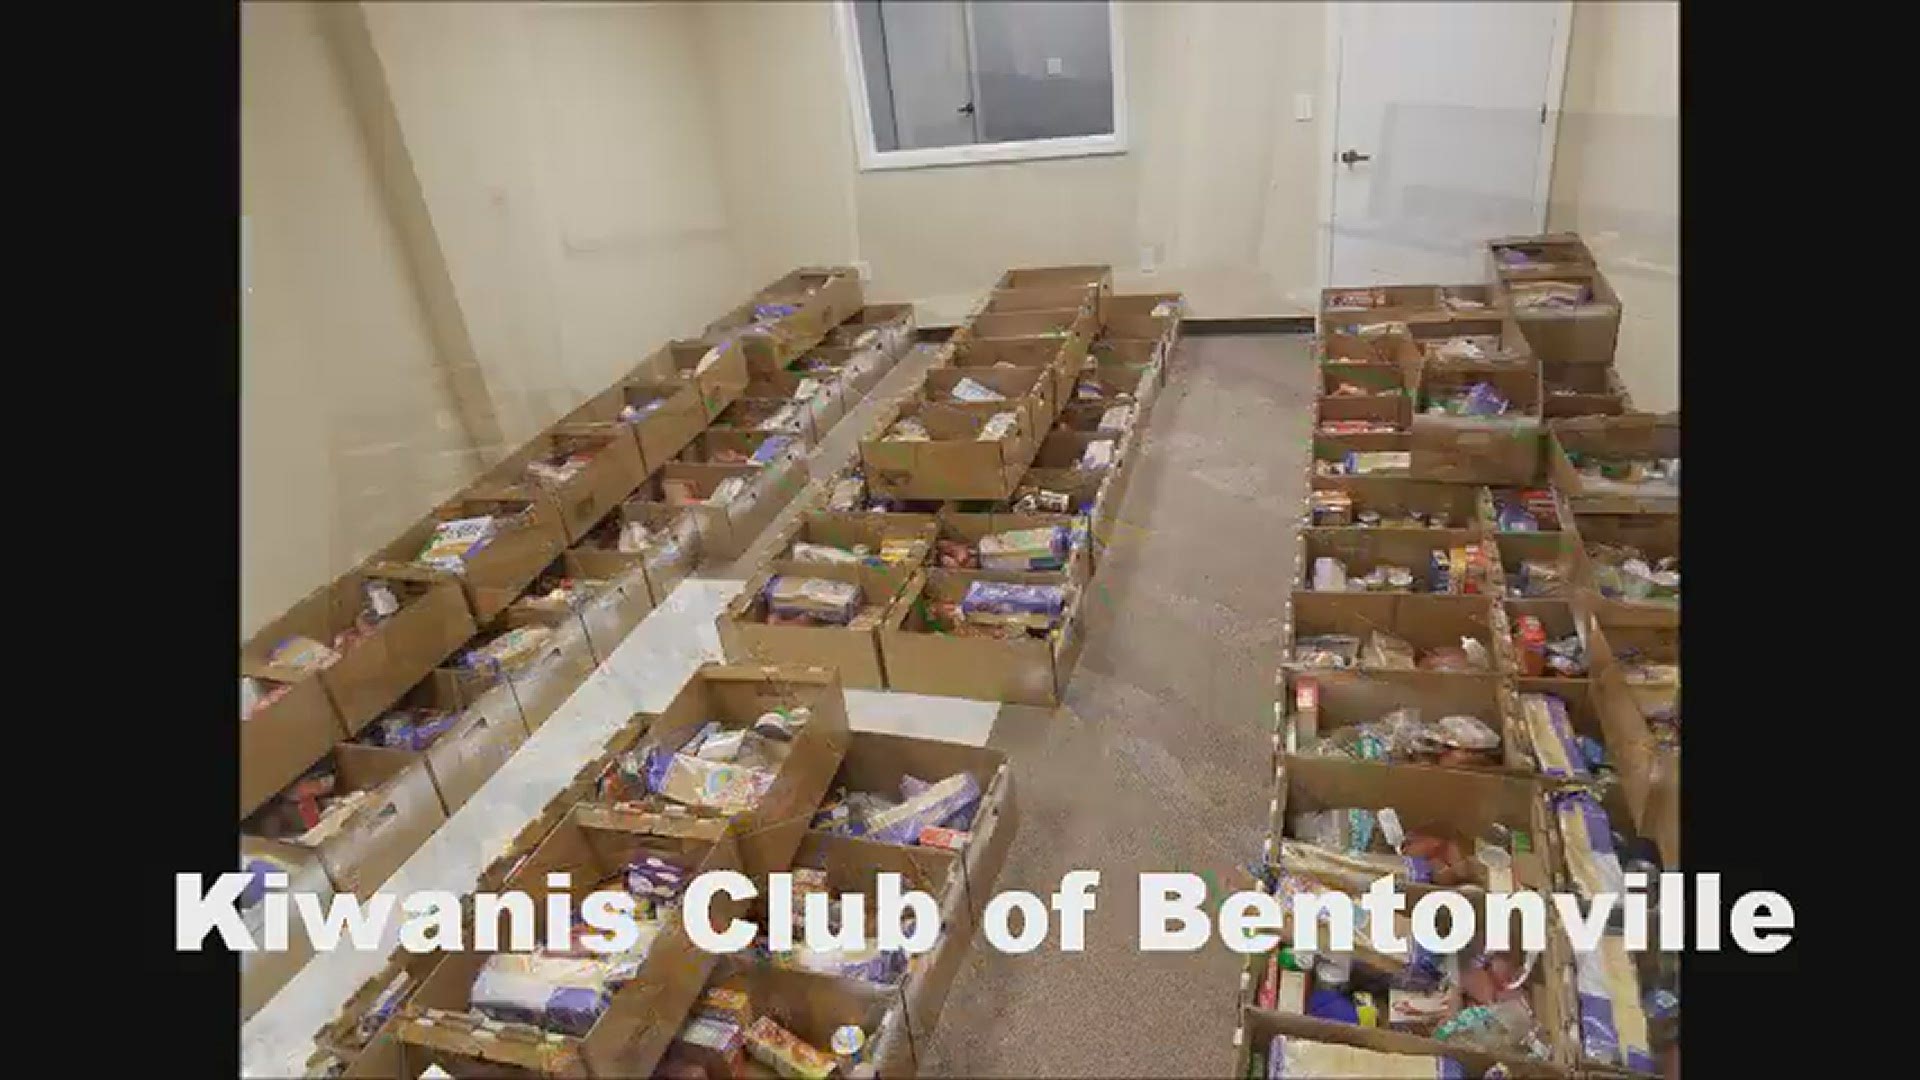 Over 500 boxes of food were given to those in need.